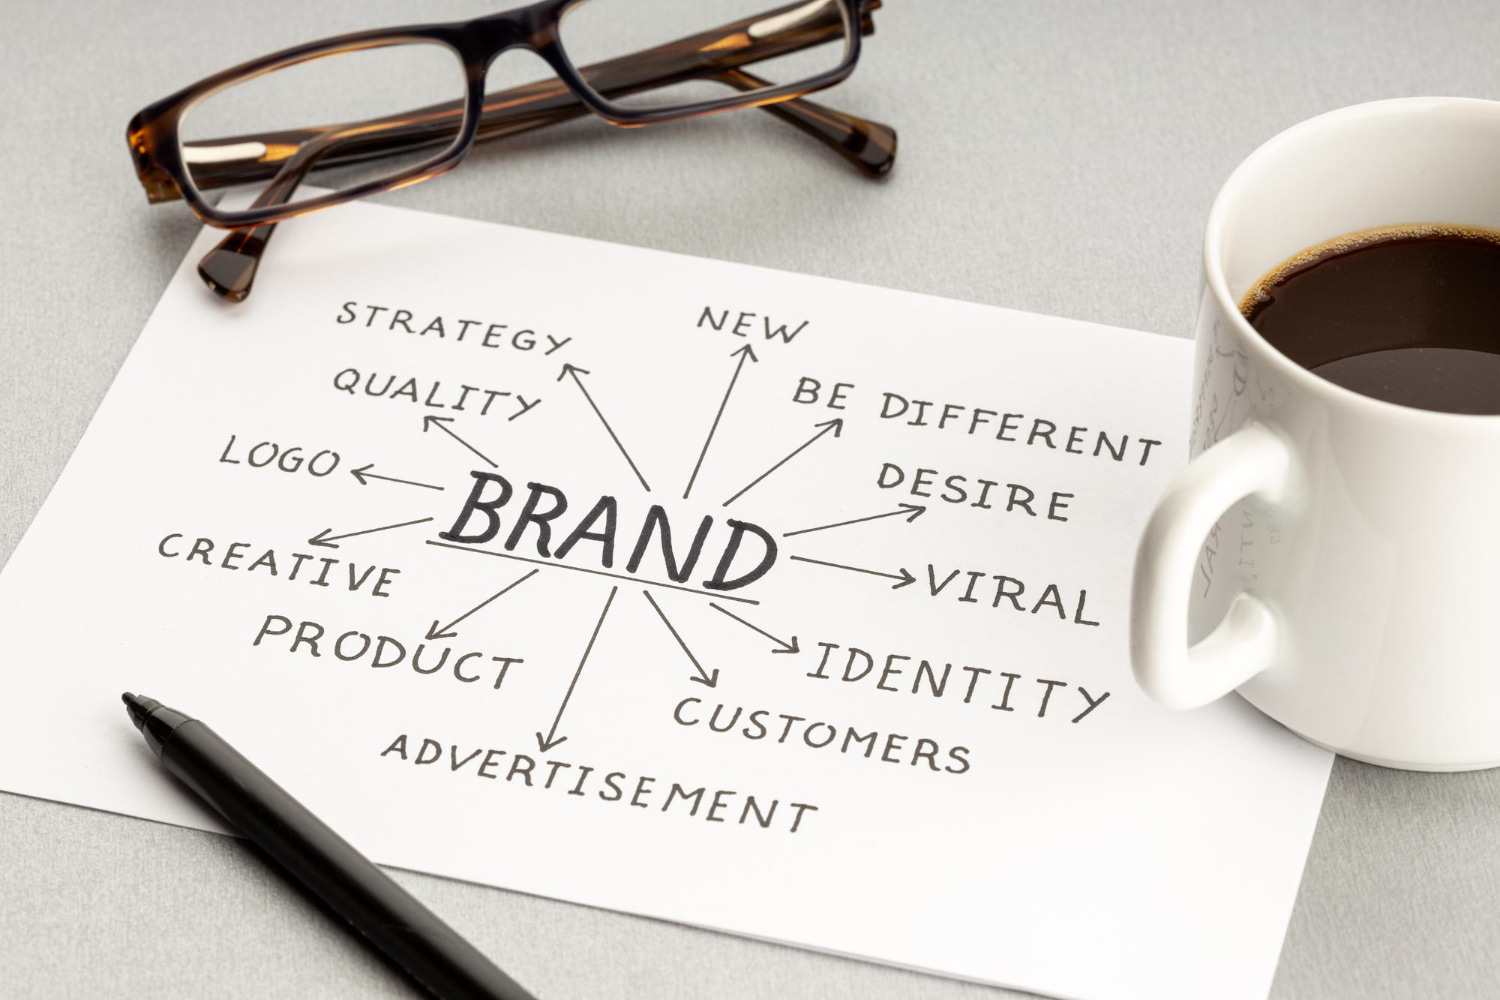 strong brand identity that sets you apart